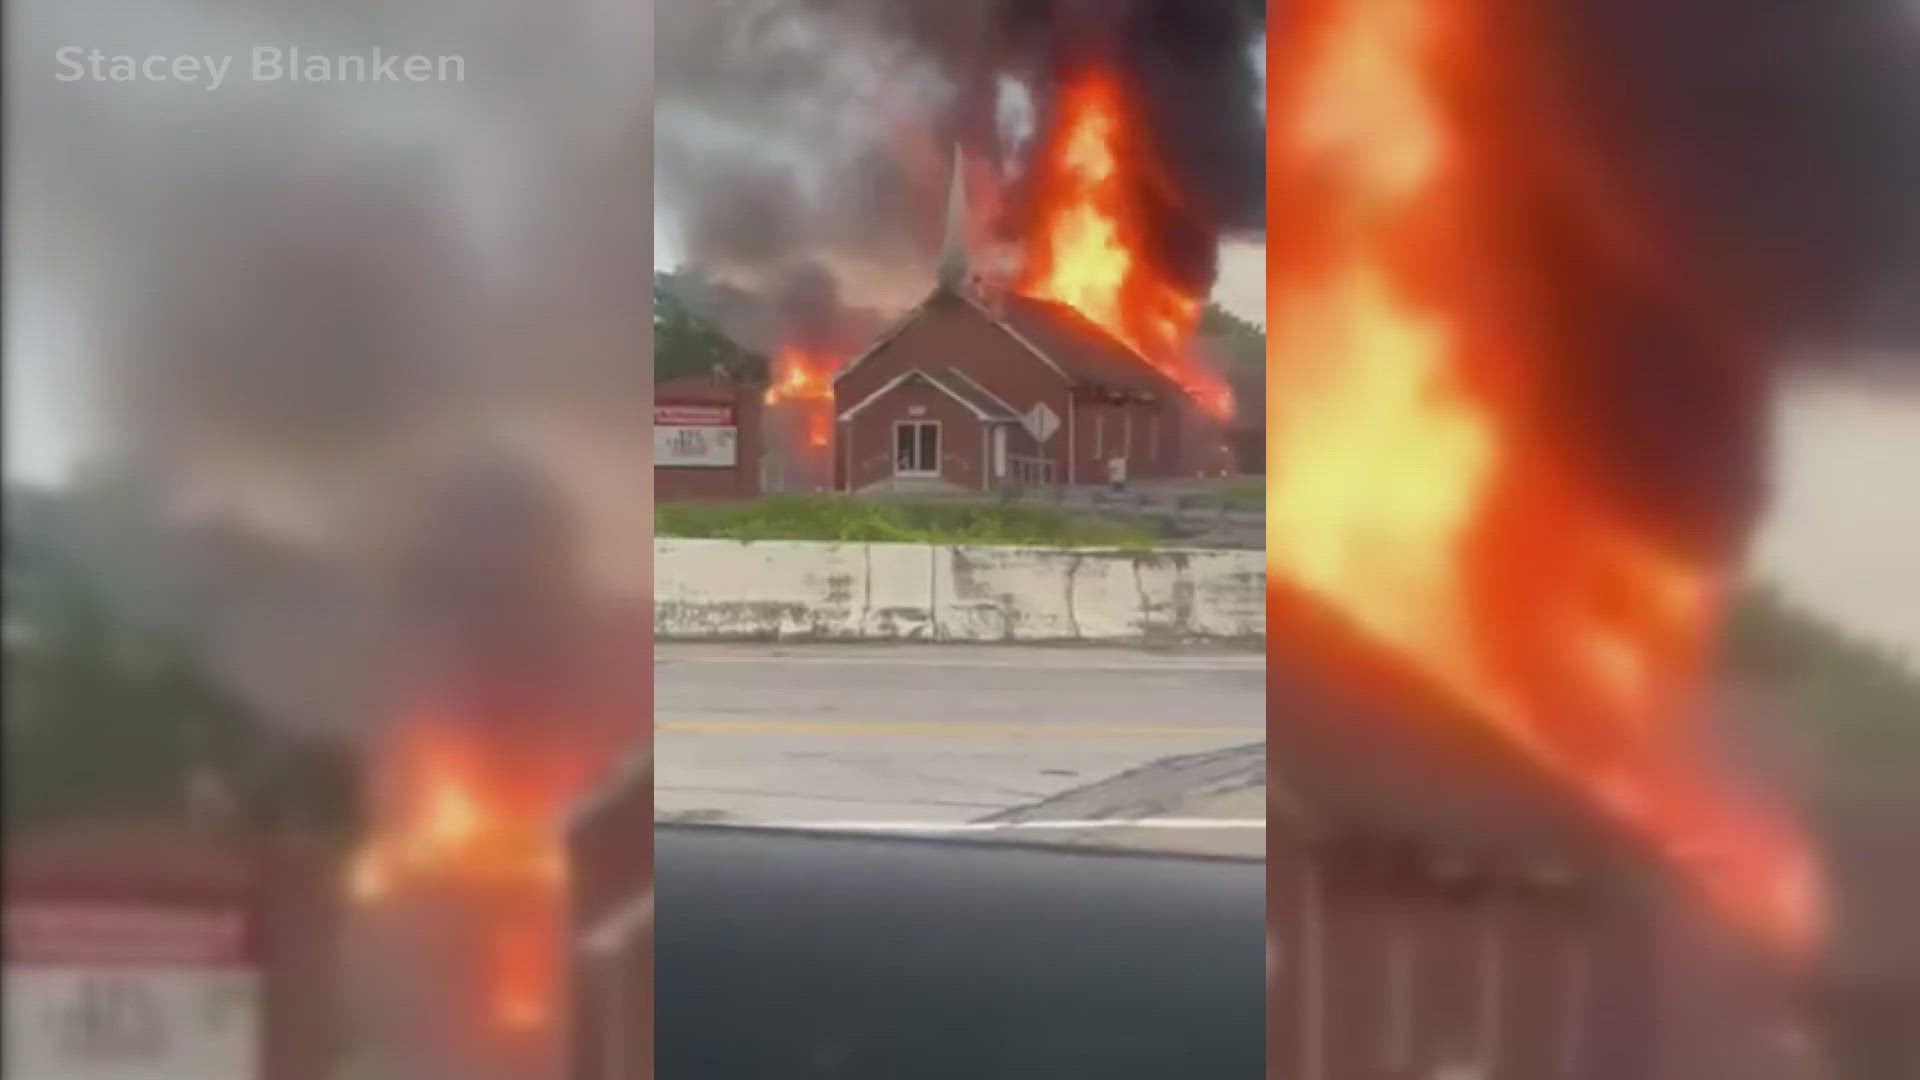 Claiborne County dispatch said the church was "completely engulfed" but no injuries have been reported as of Saturday evening.